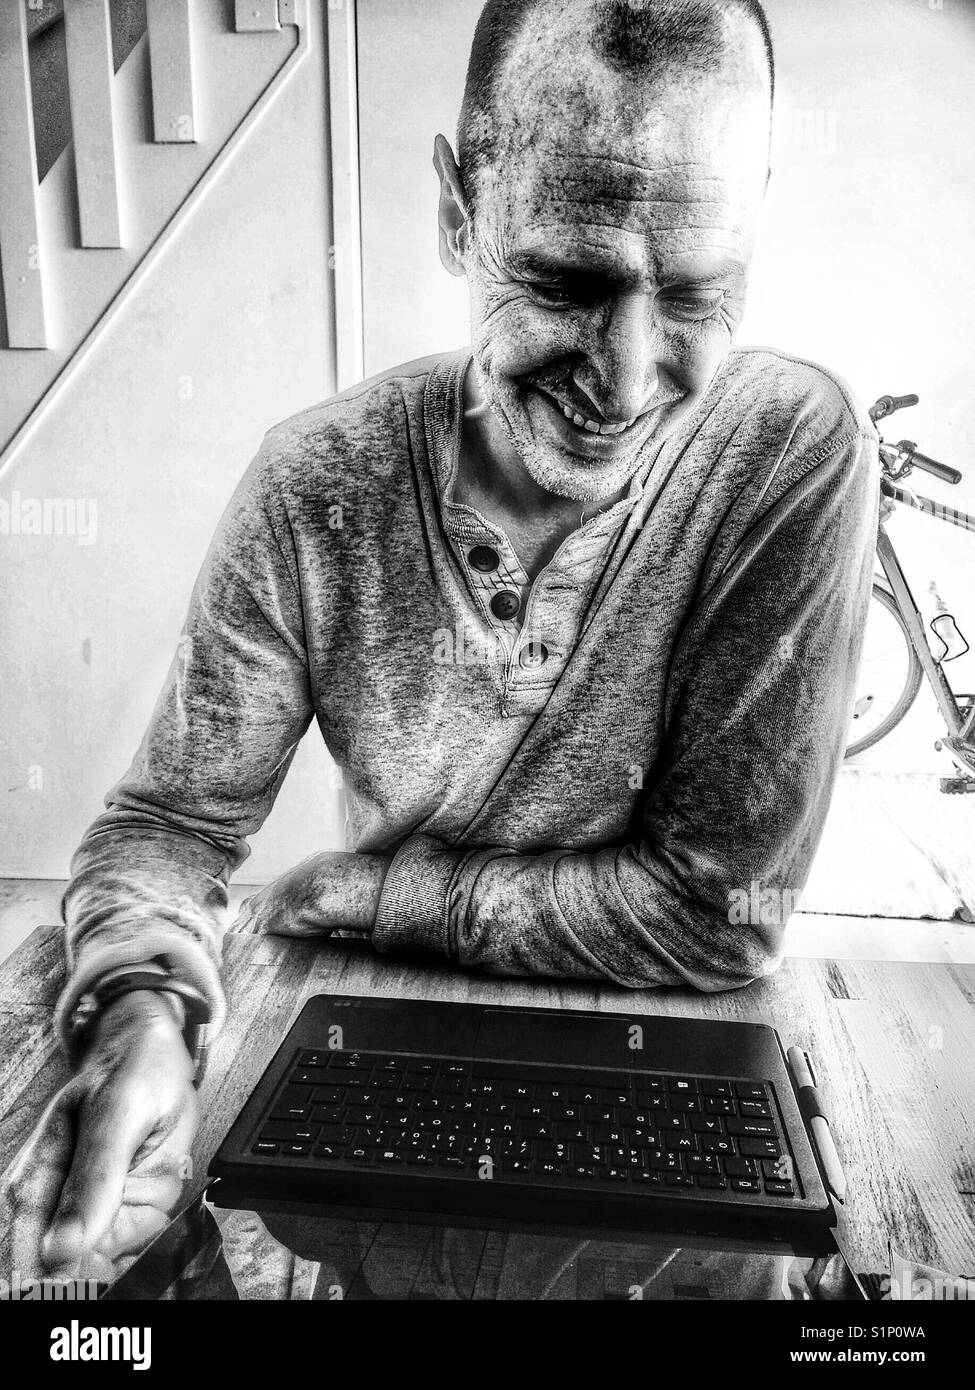 Smiling middle aged Scandinavian man working on laptop at home Stock Photo